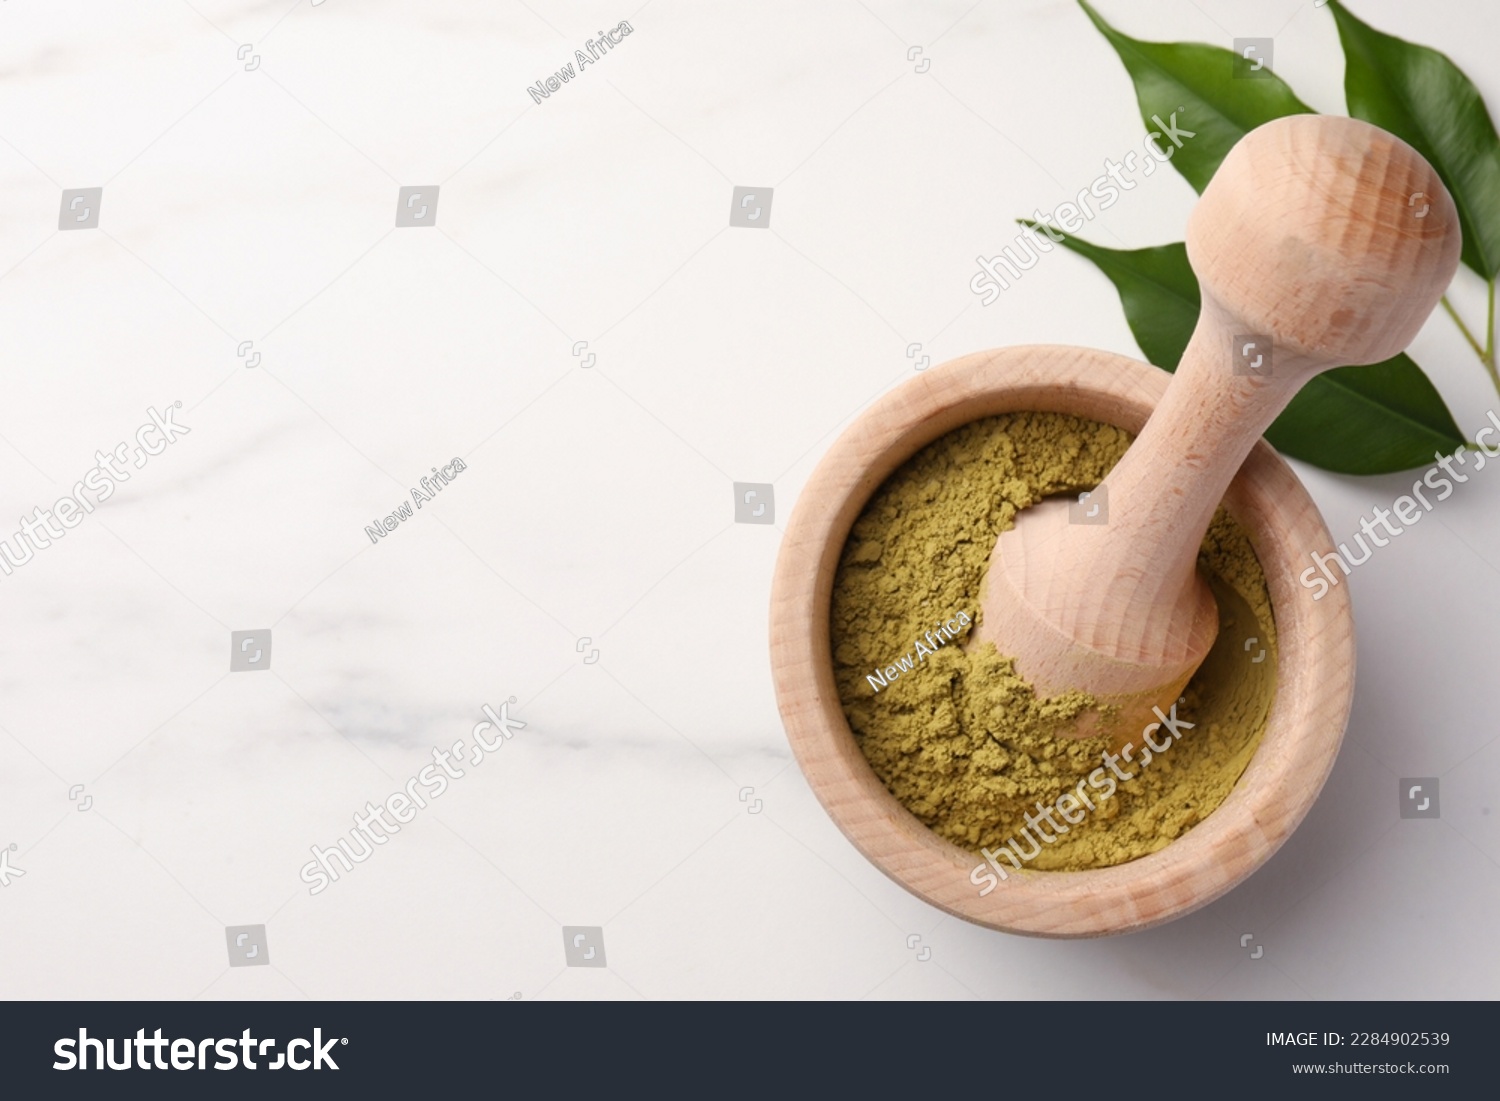 Mortar of henna powder and green leaves on white marble table, top view with space for text. Natural hair coloring #2284902539